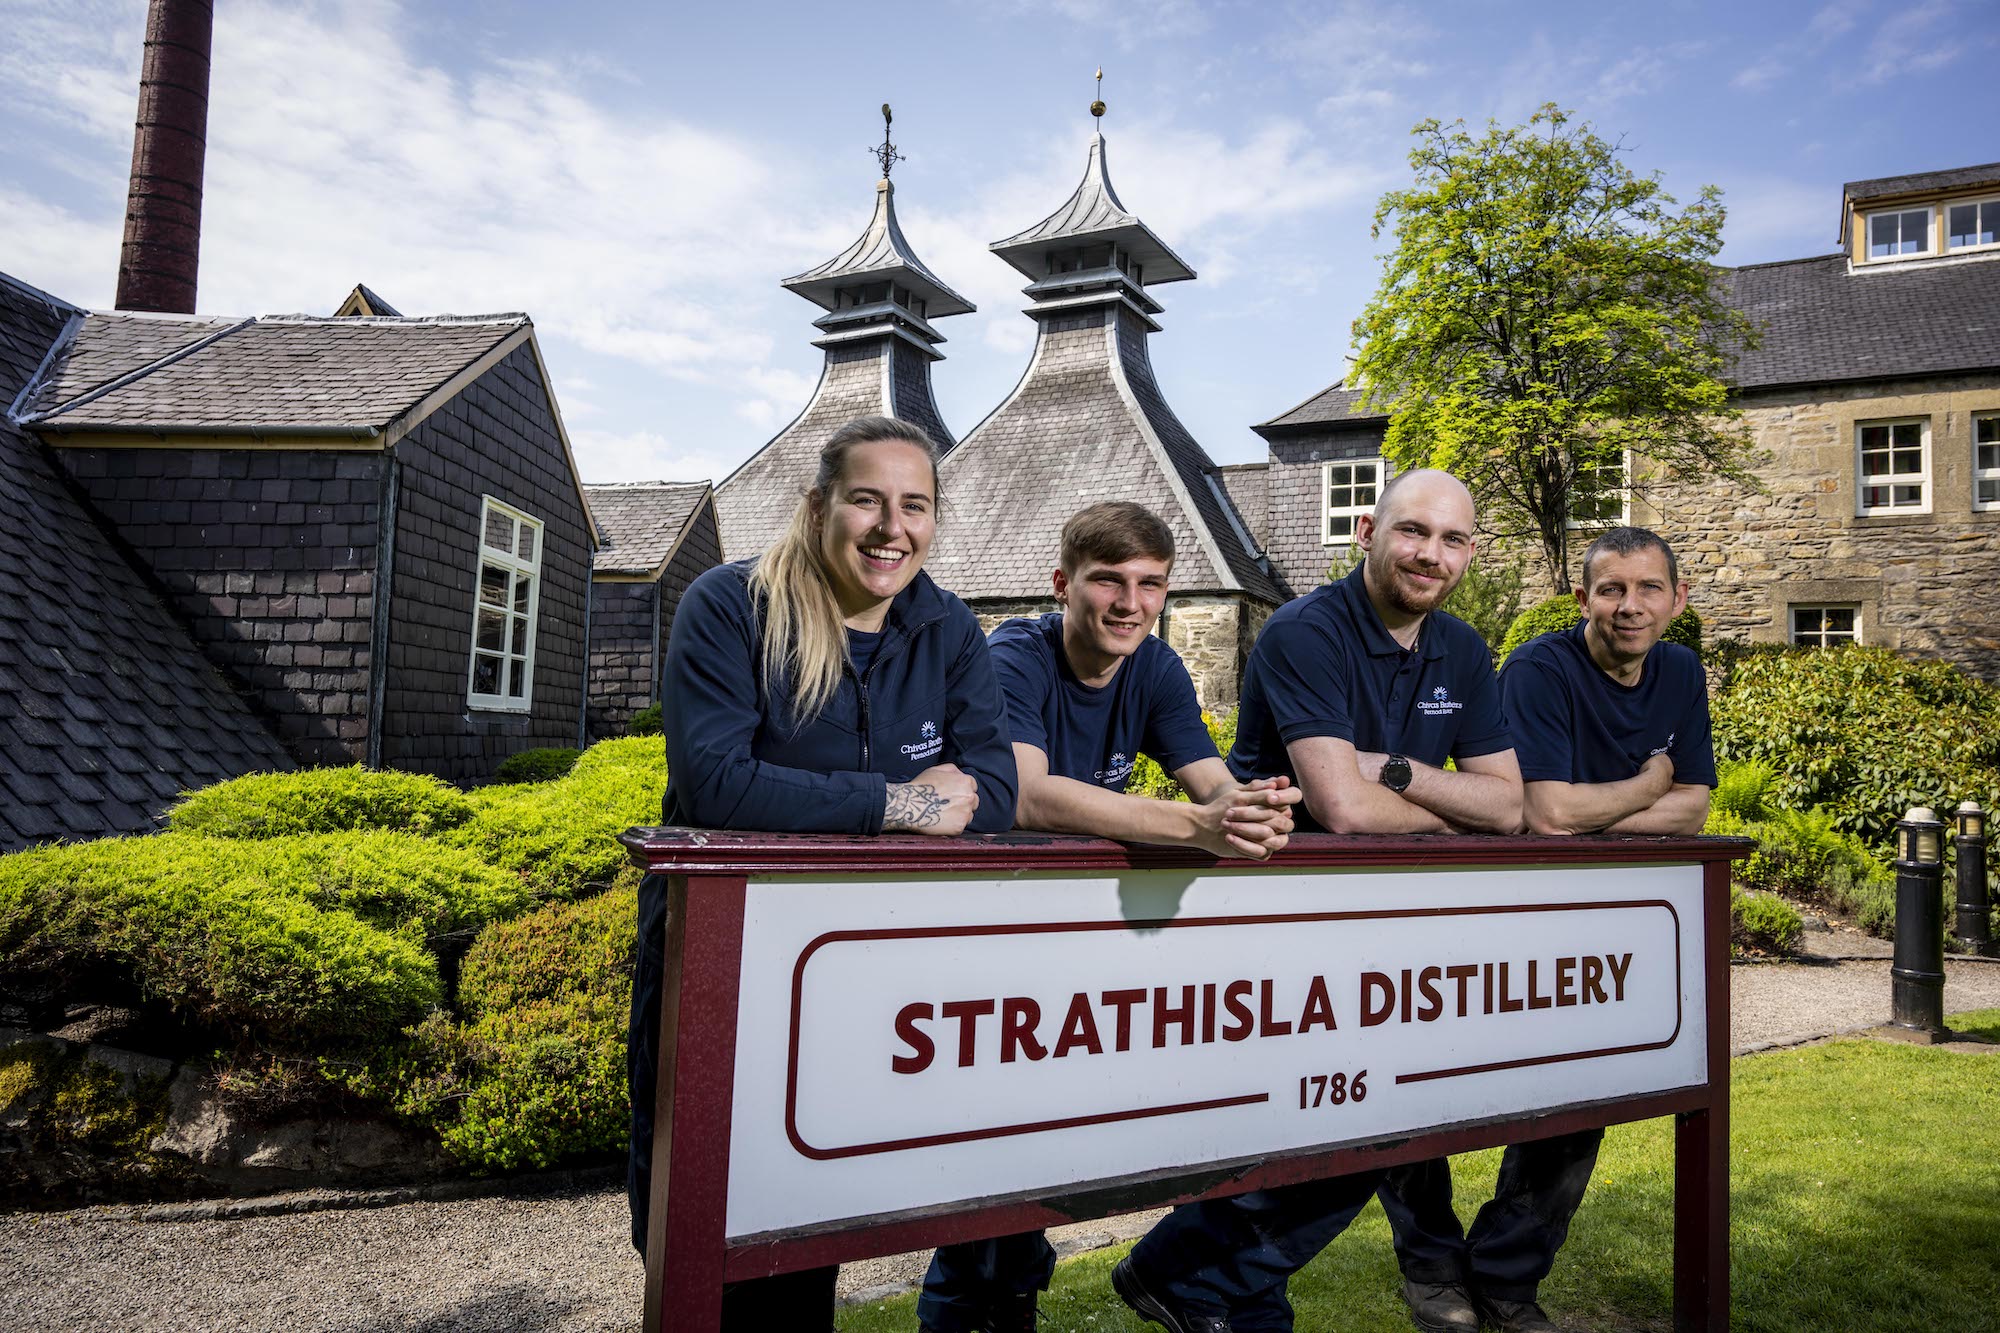 Chivas Brothers to showcase diverse whisky careers at Strathisla Distillery’s open day